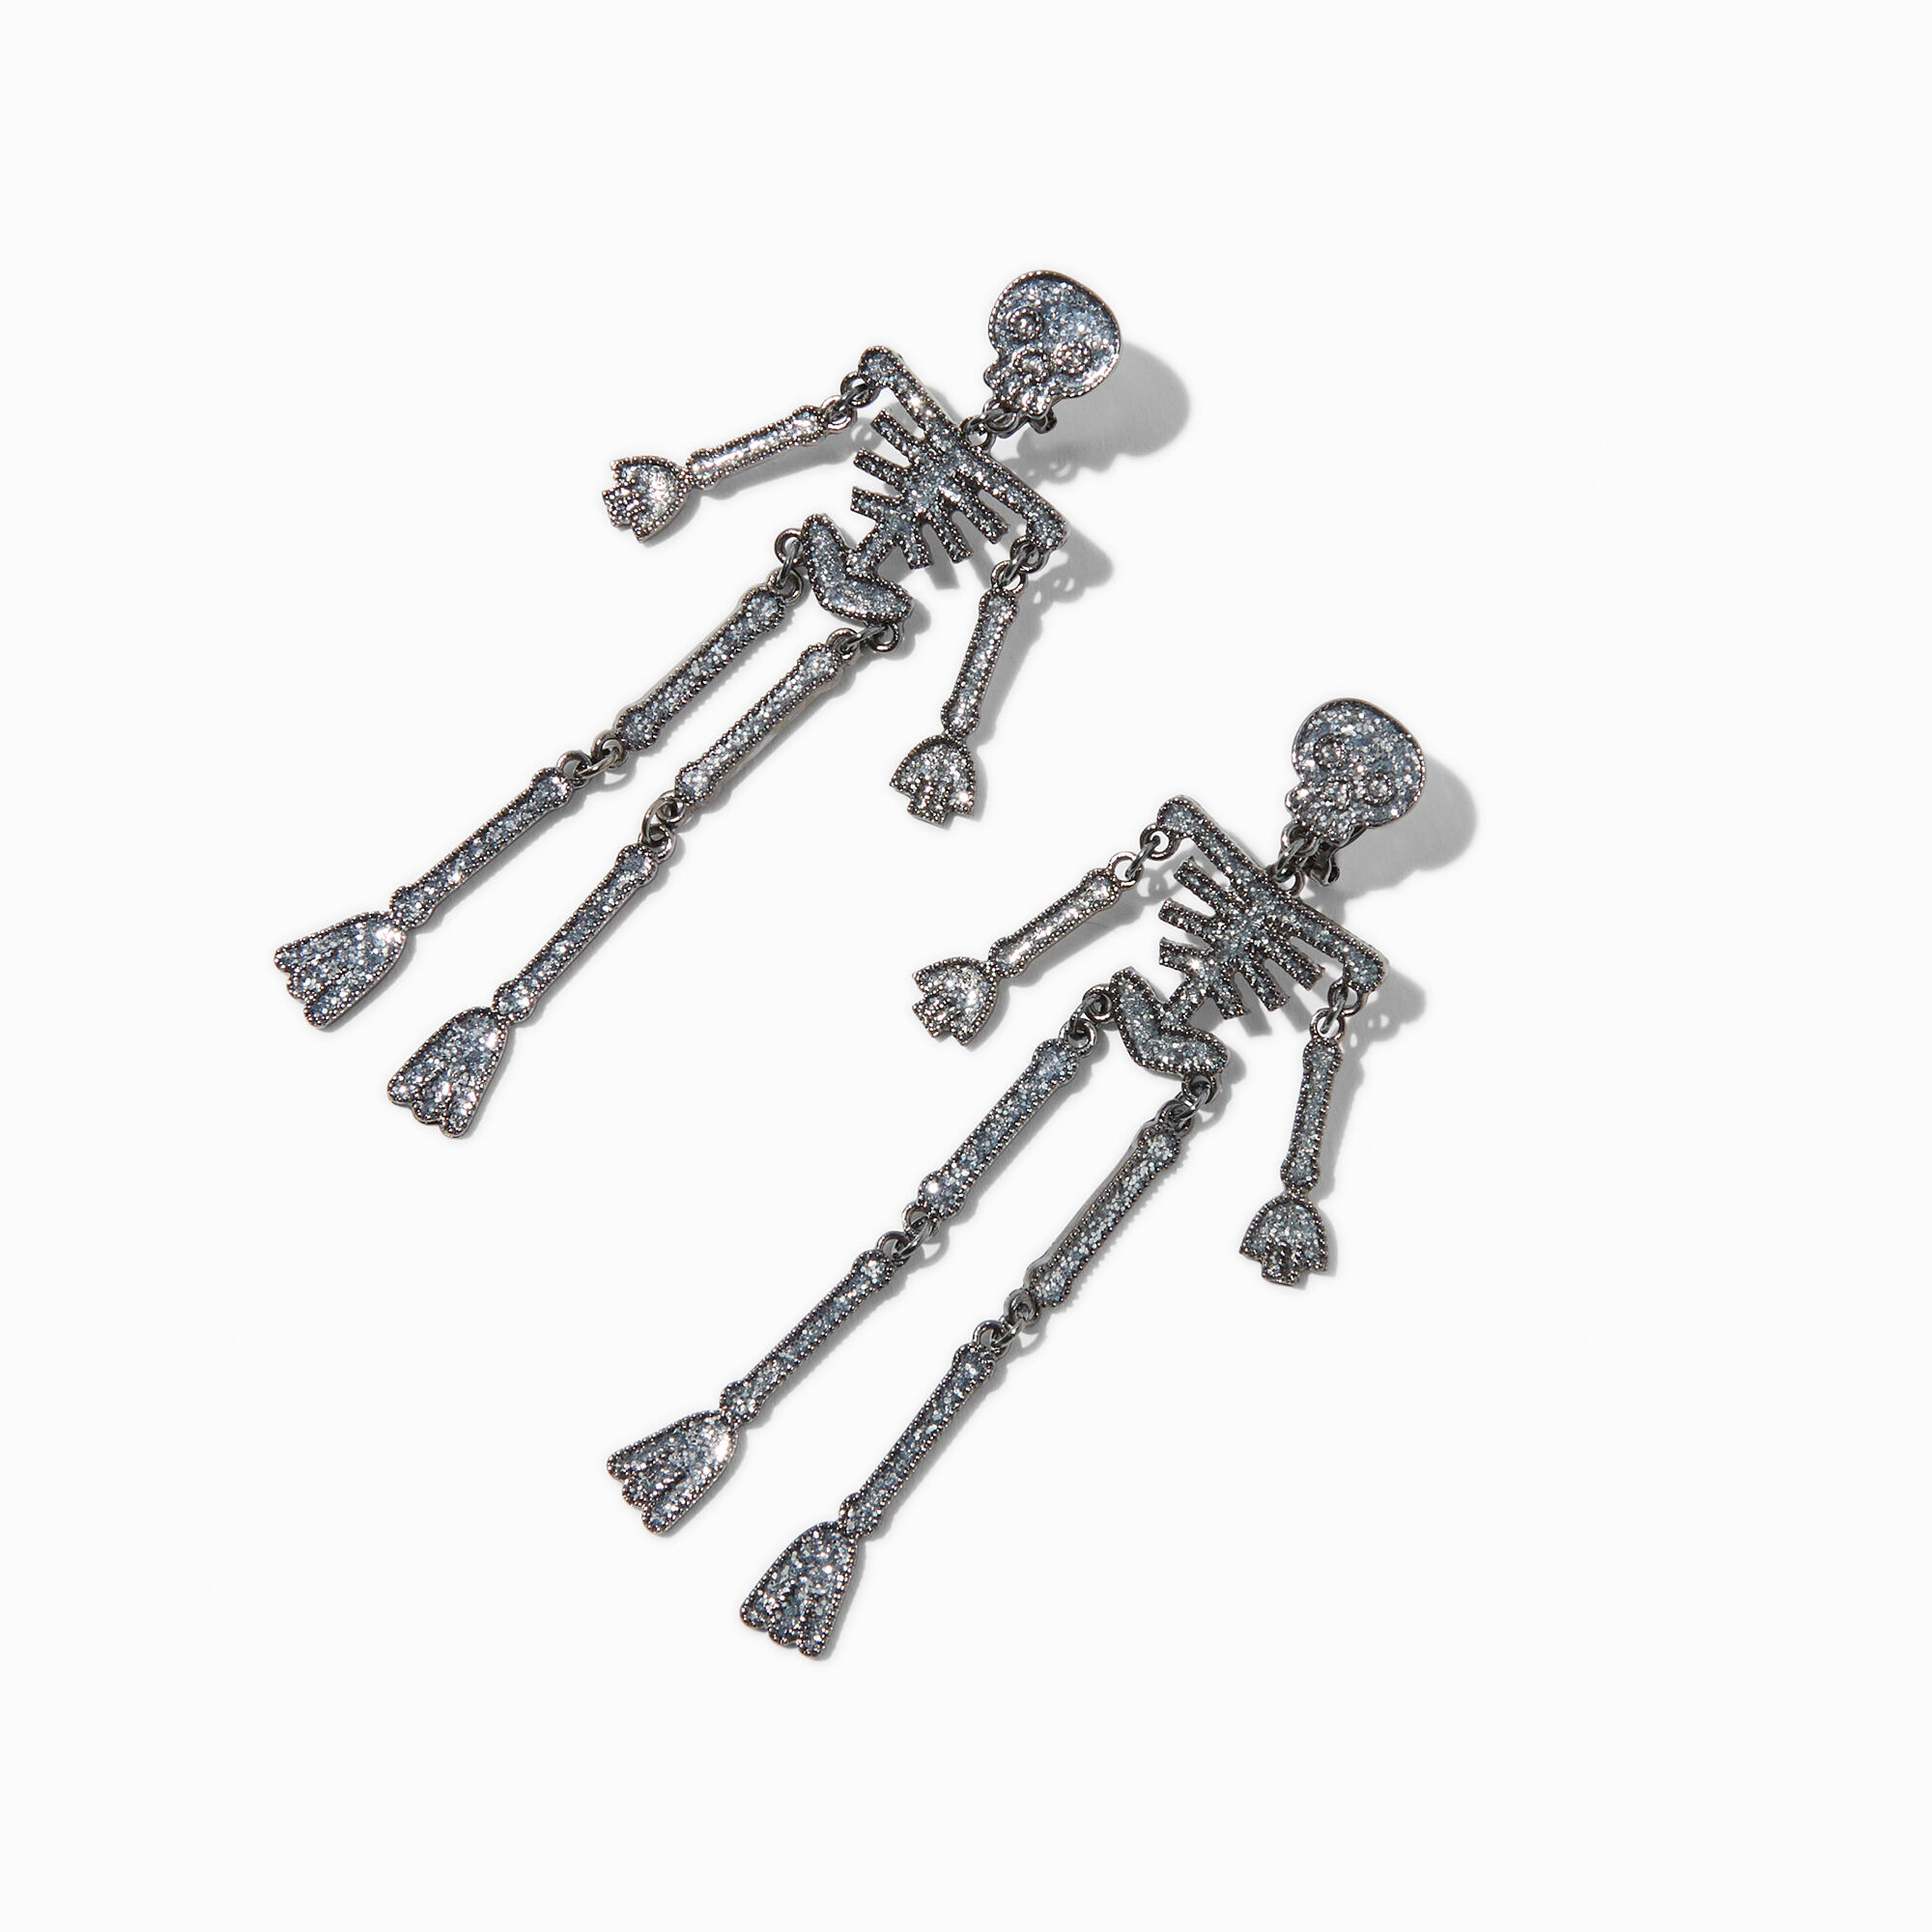 View Claires Glittery Jointed Skeleton 4 ClipOn Drop Earrings information